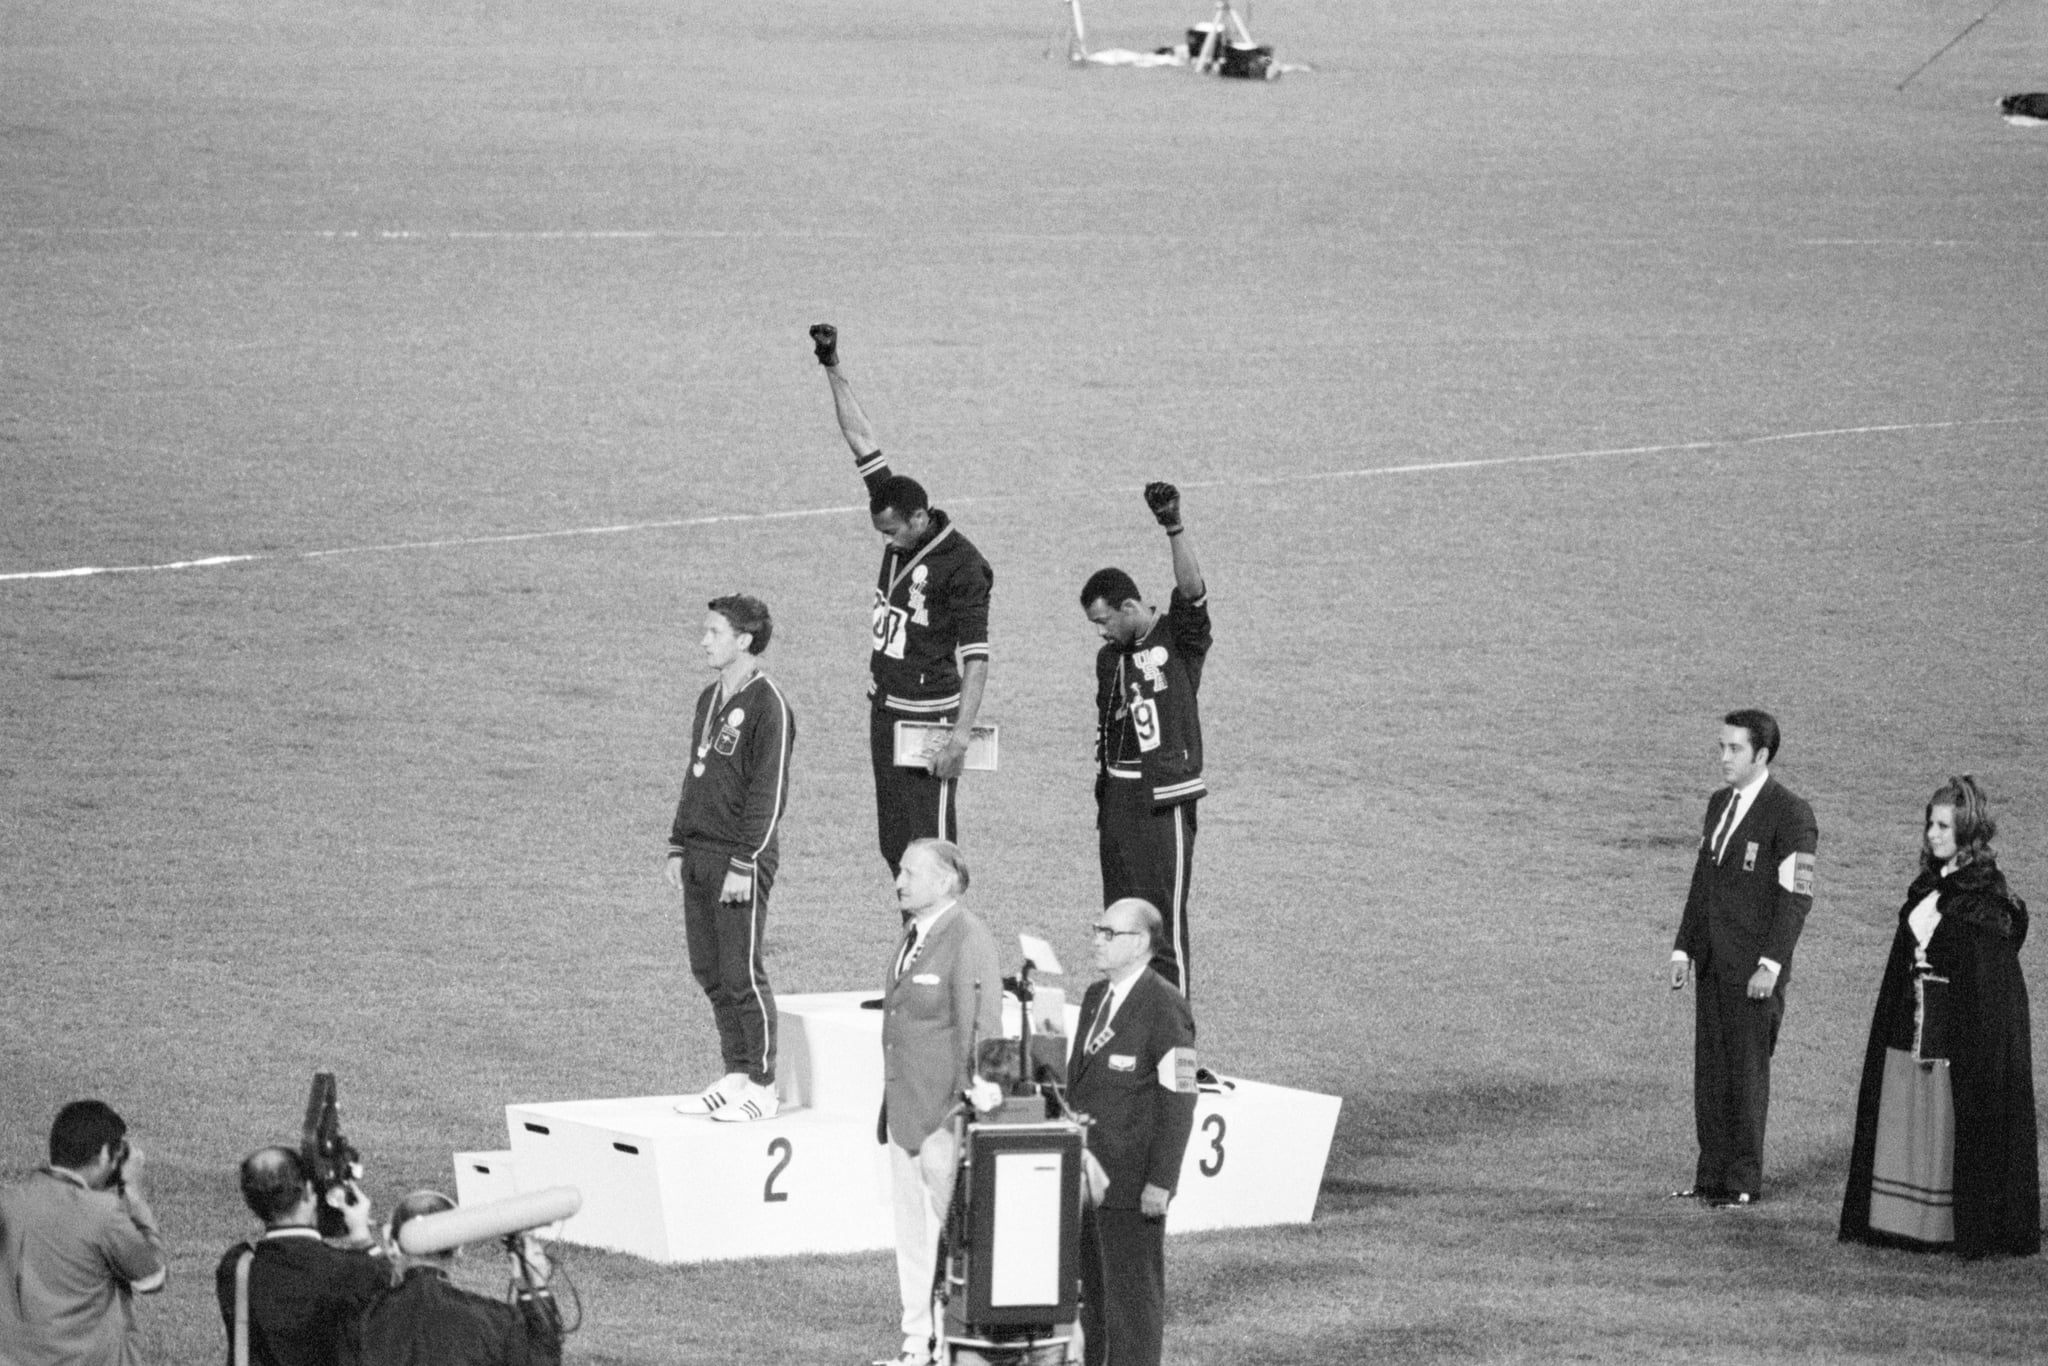 Tommie Smith and John Carlos, gold and bronze medalists in the 200-meter run at the 1968 Olympic Games, engage in a victory stand protest against unfair treatment of blacks in the United States. With heads lowered and black-gloved fists raised in the black power salute, they refuse to recognize the American flag and national anthem. Australian Peter Norman is the silver medalist.